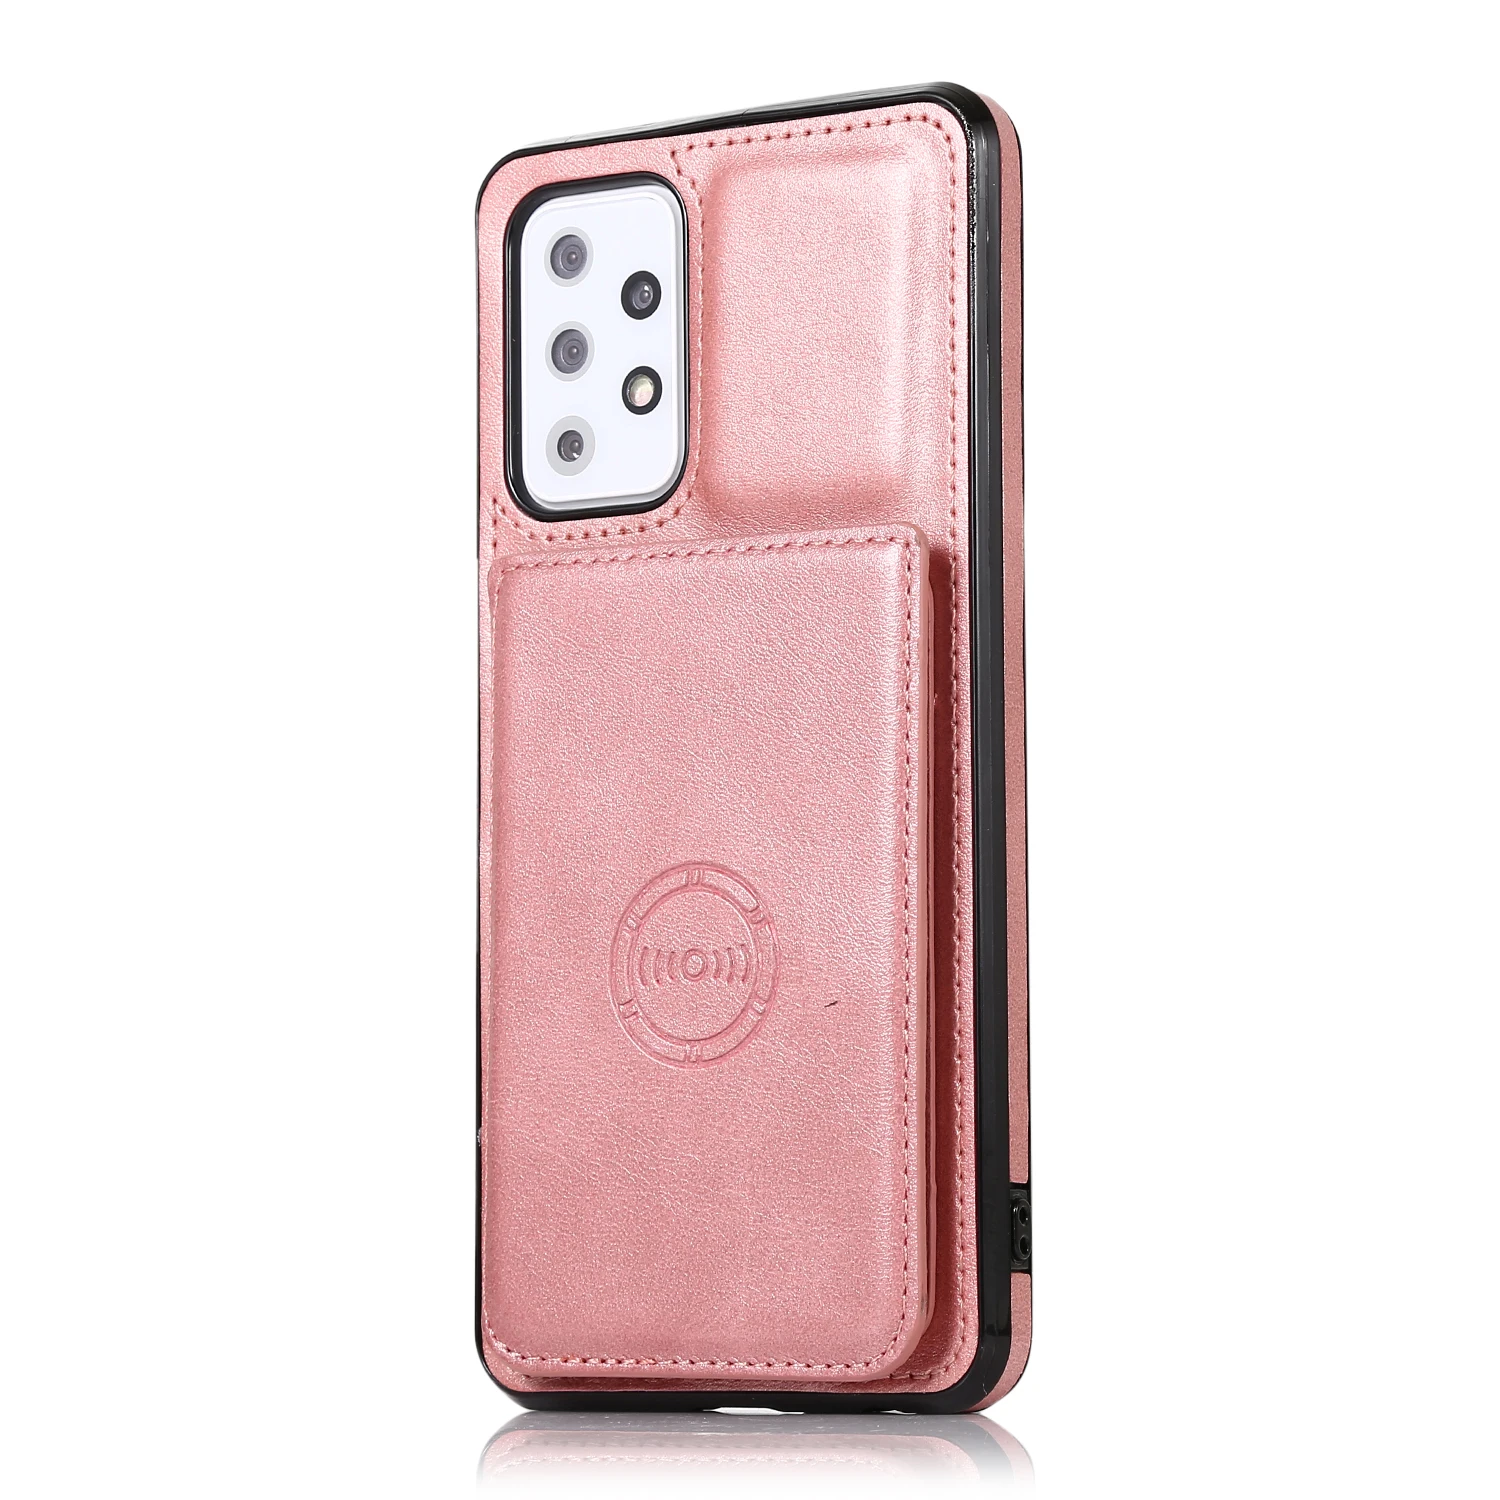 kawaii samsung phone cases Luxury Car Magnet Wallet Case For Samsung Galaxy A22 A32 4G A12 A42 A52 A72 A82 5G S20 S21 S22 Plus Stand Cover Multi Cards kawaii phone cases samsung